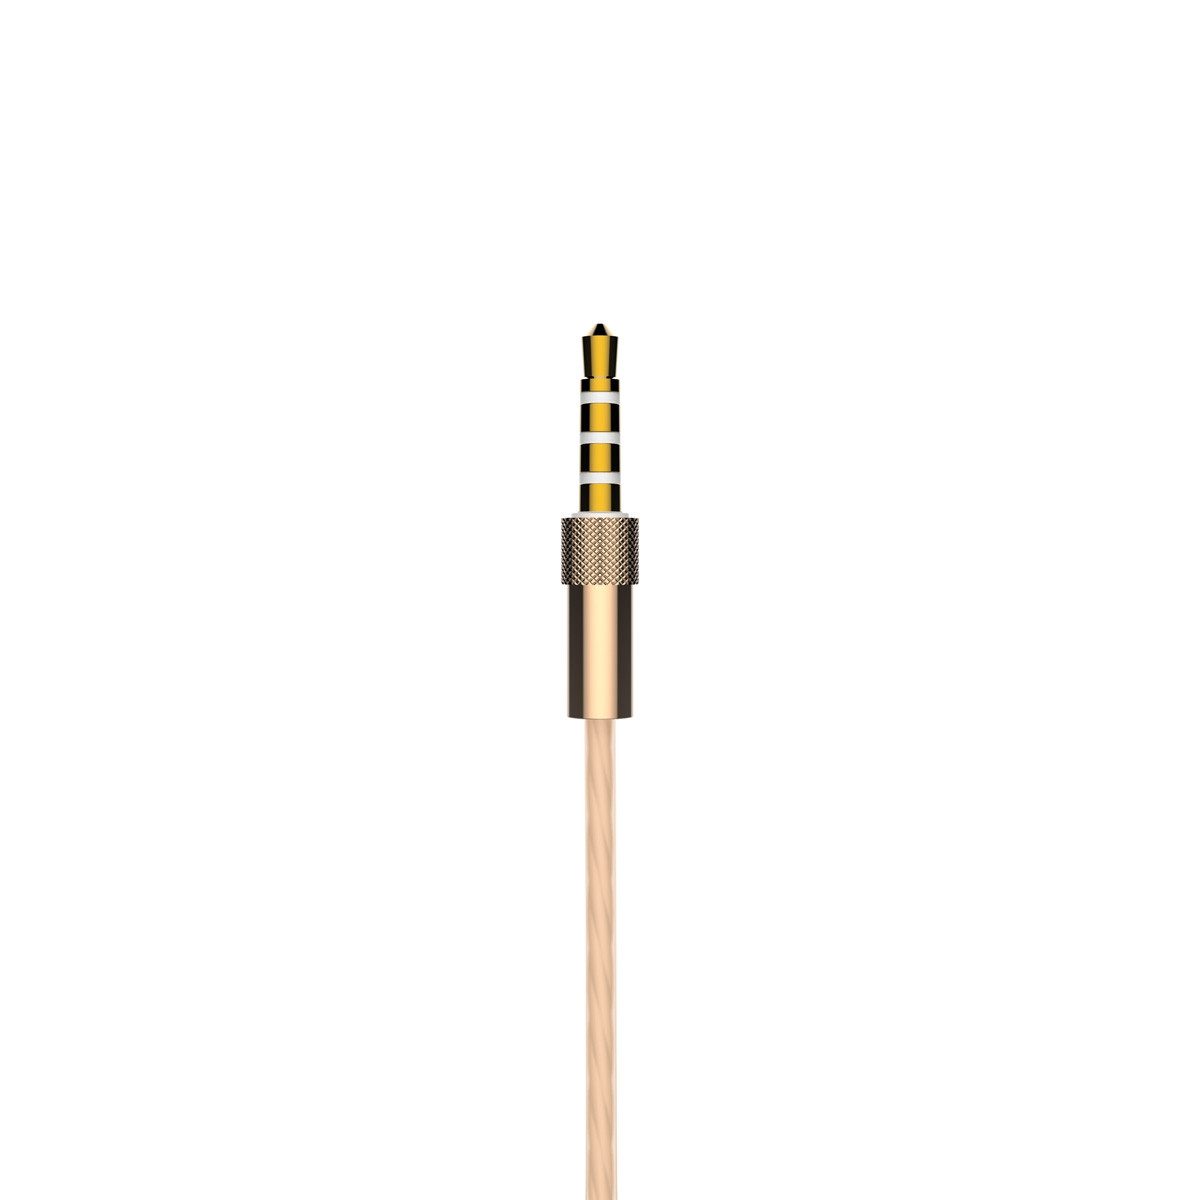 3663111117462-PN-MUHPH0080-Cod.-Articulo-DSP0000022101-Auriculares-muvit-m1i3.5-mm-oro-3